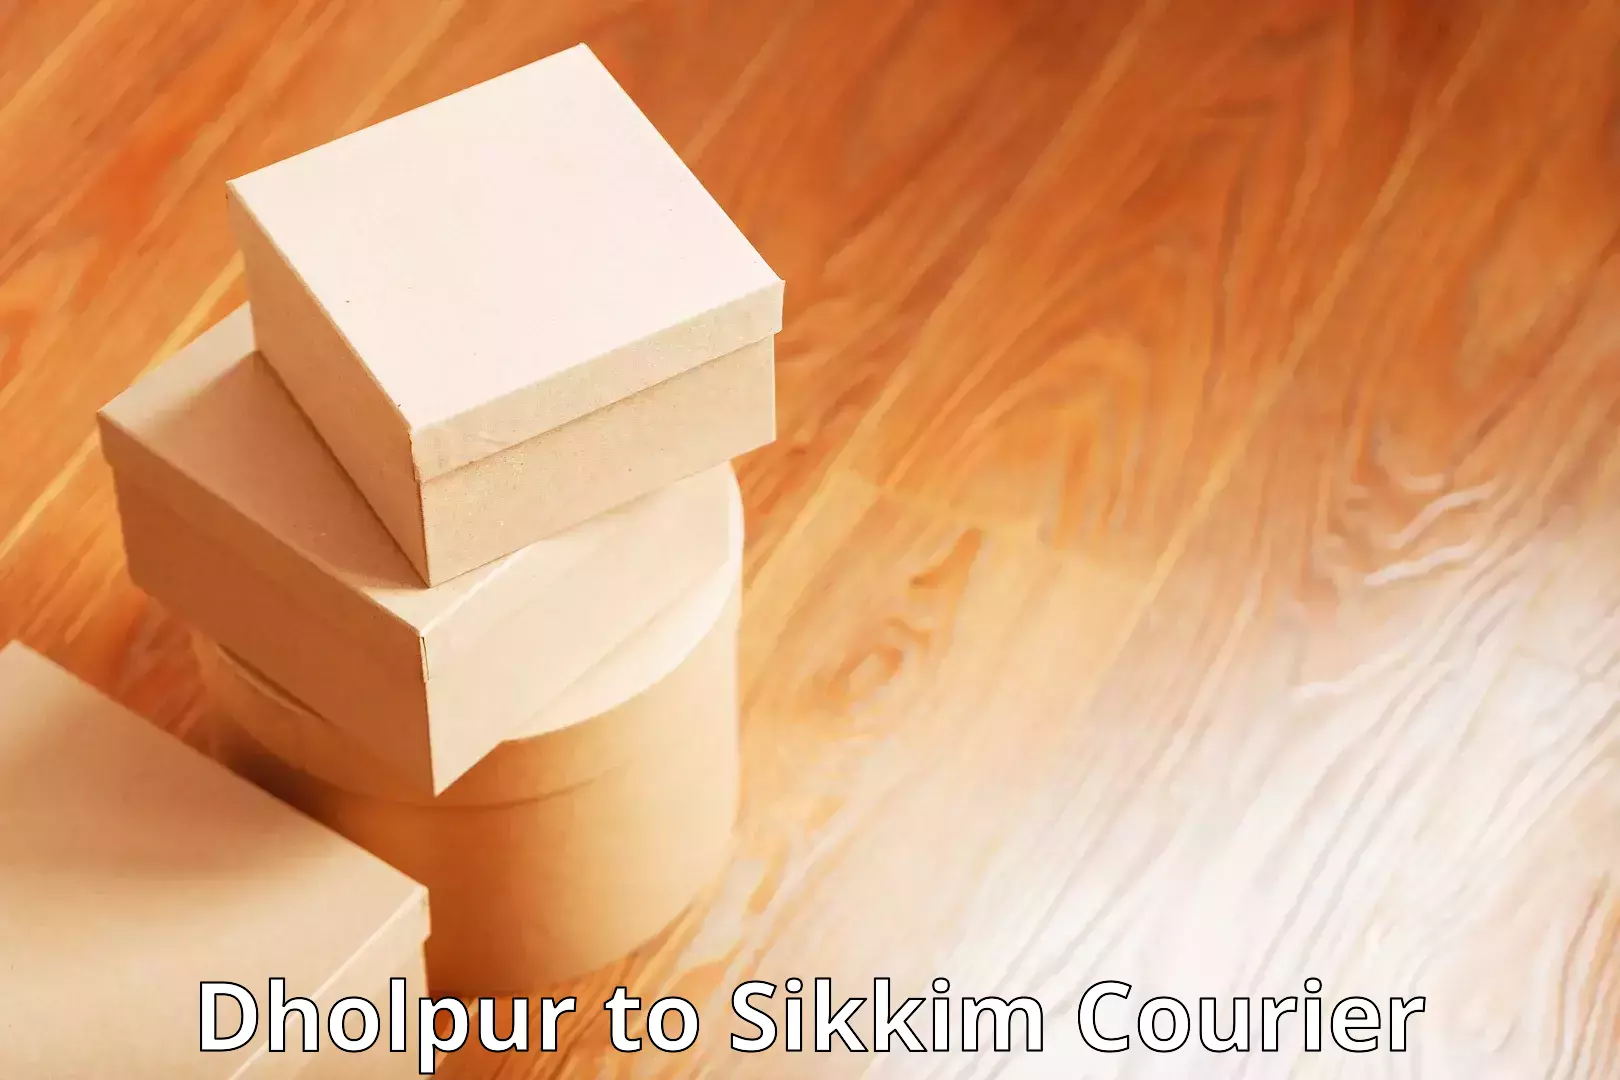 High-capacity parcel service Dholpur to Sikkim